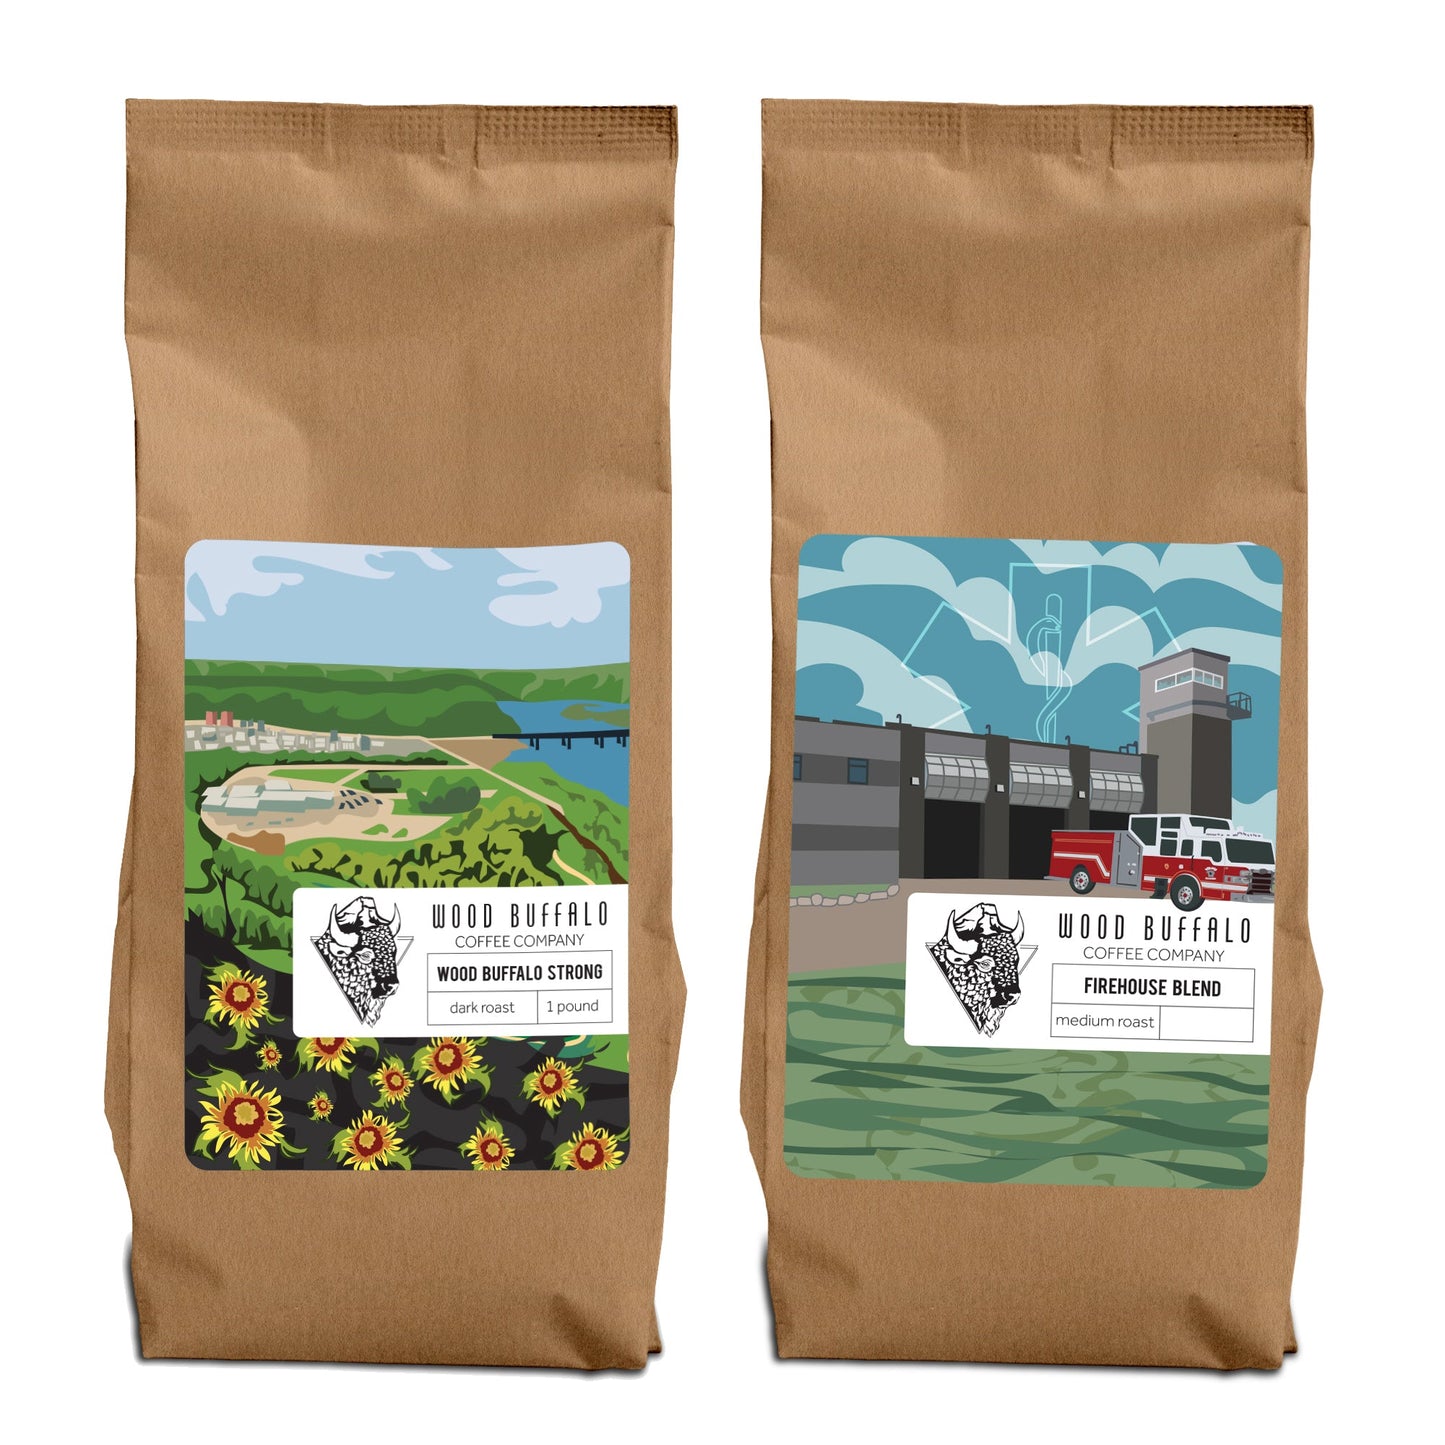 wood buffalo strong and Firehouse blend coffee